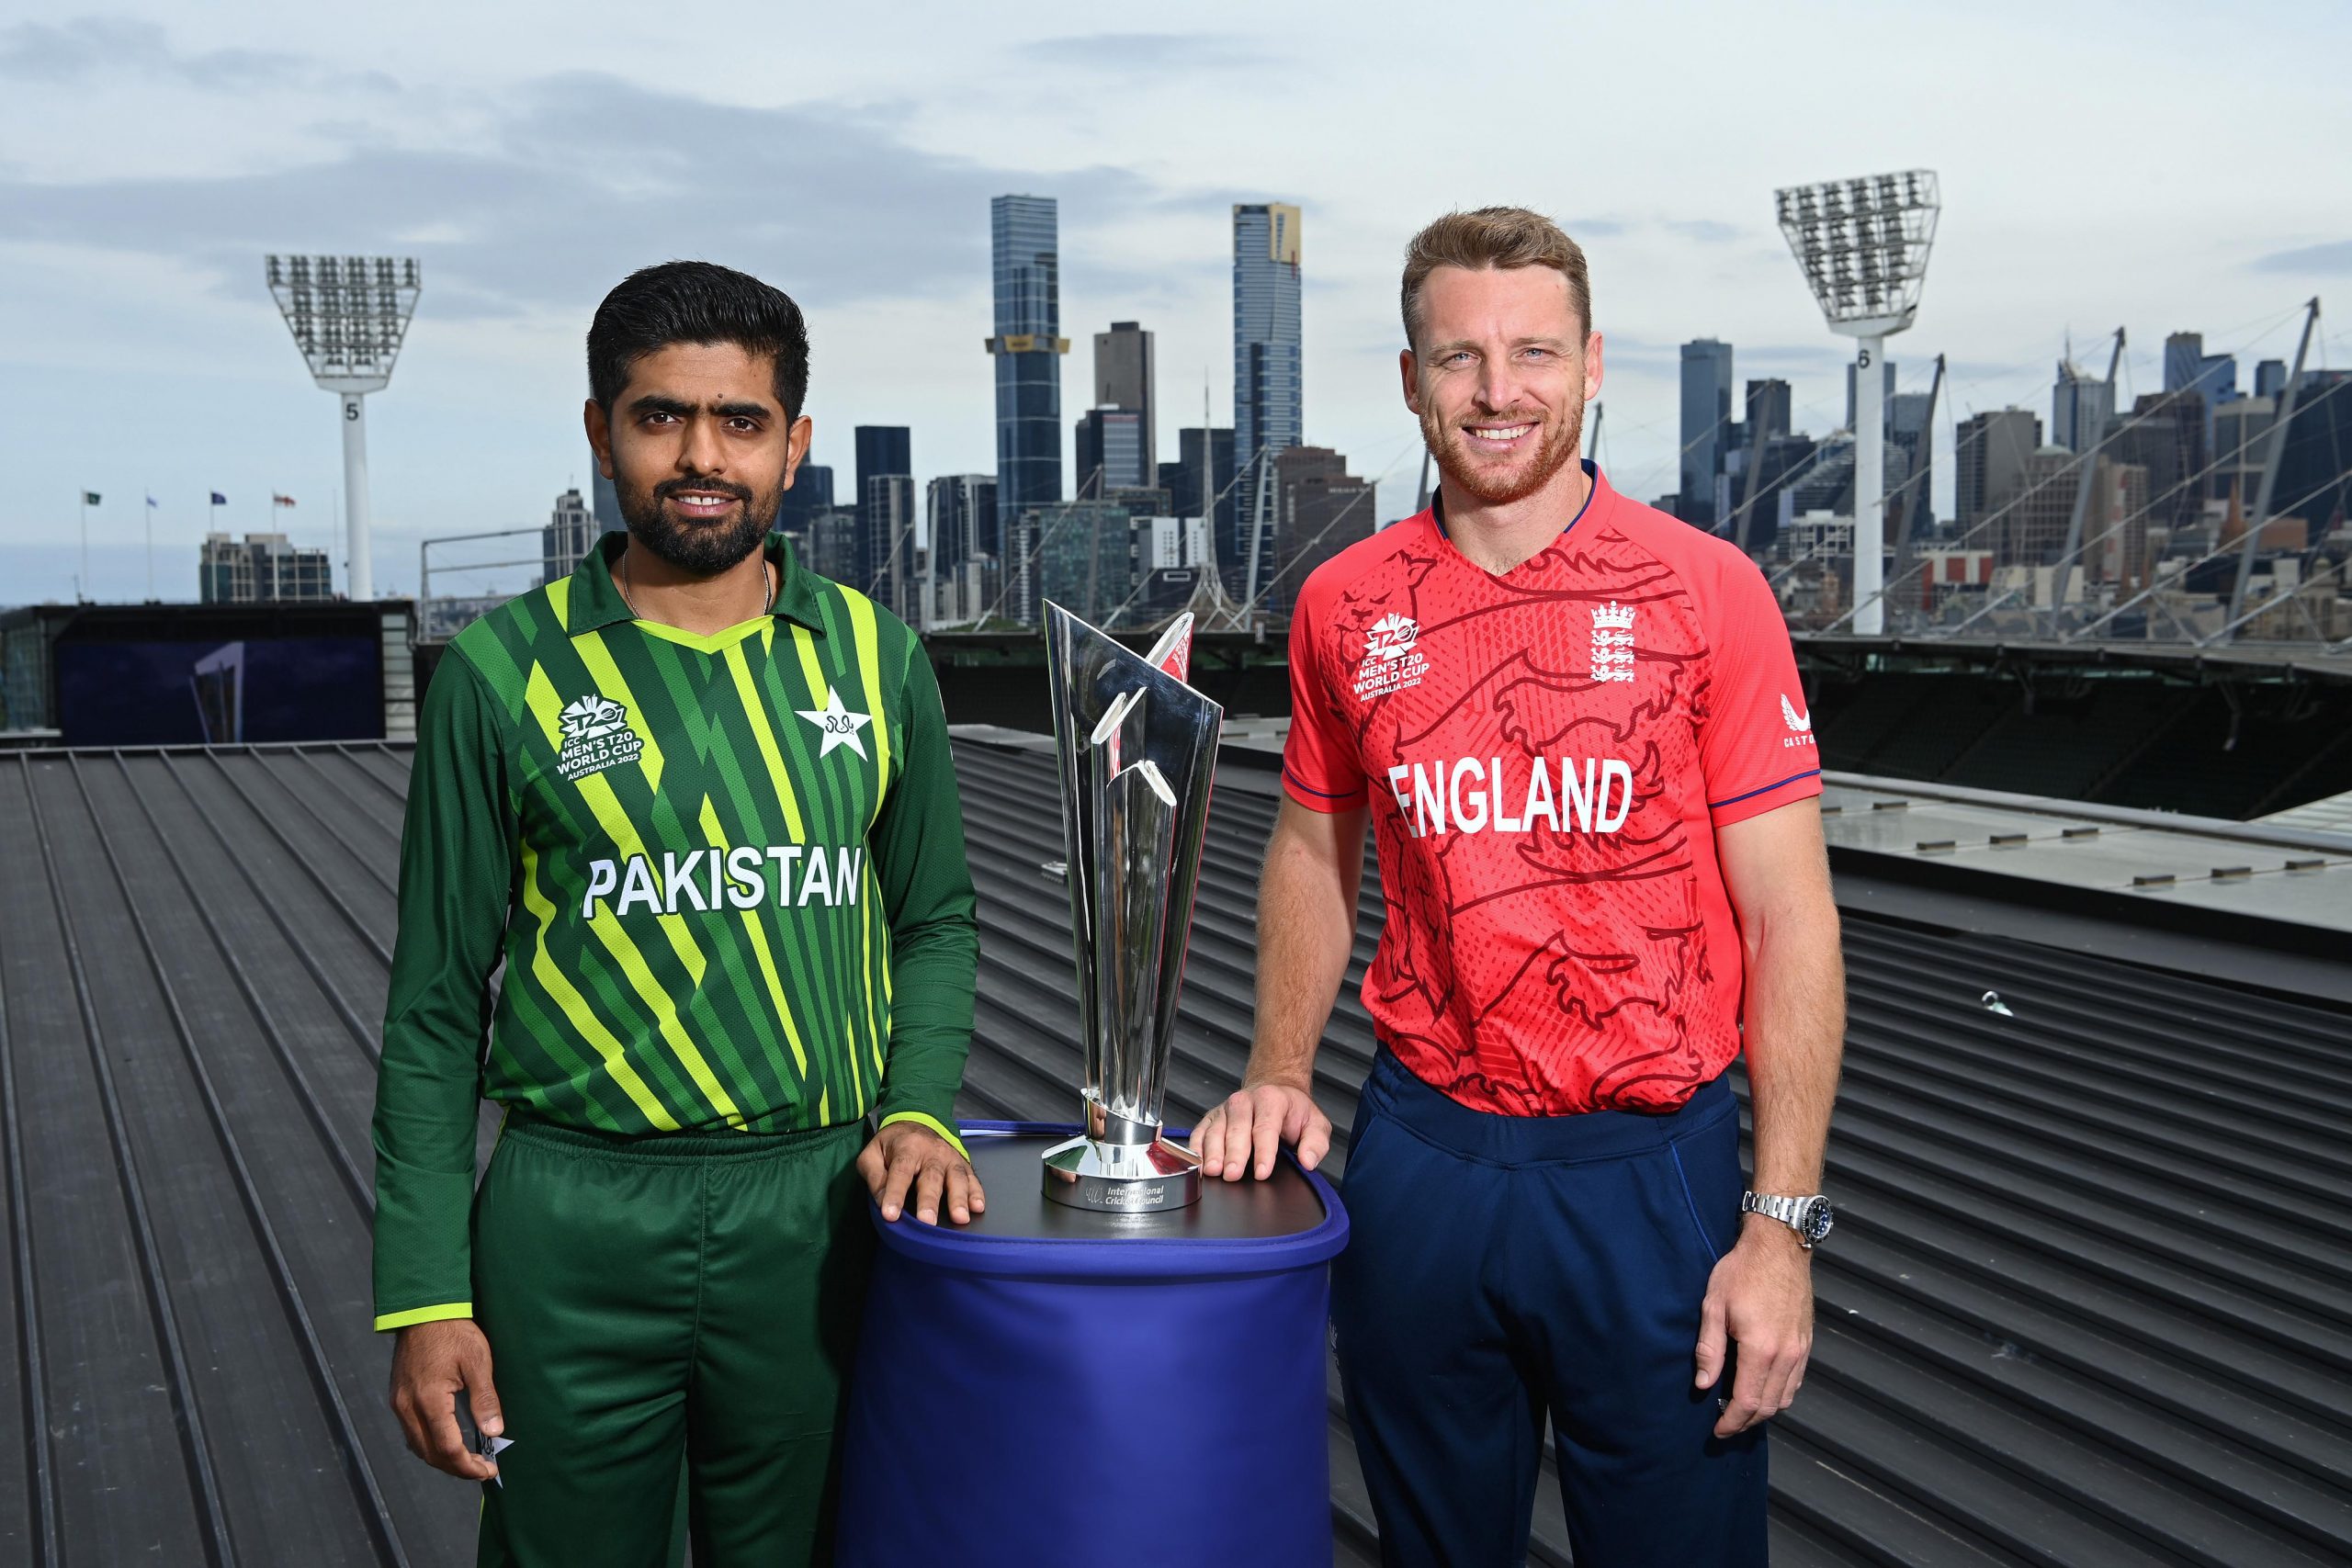 Pakistan vs England T20 WC final: Records, stats, weather, and pitch report